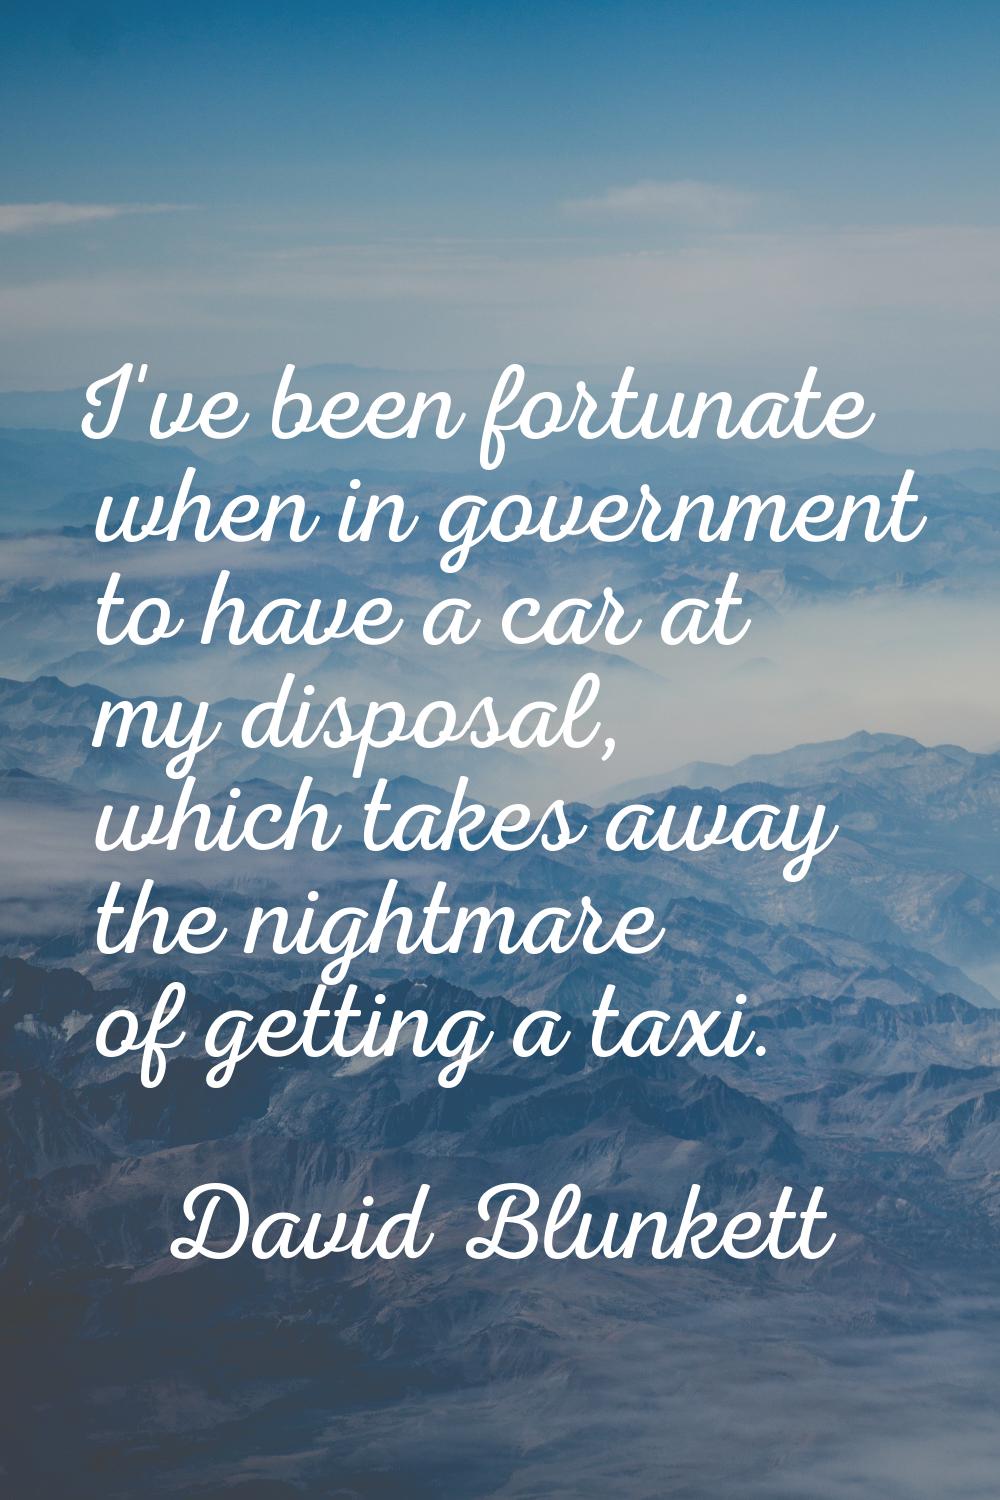 I've been fortunate when in government to have a car at my disposal, which takes away the nightmare